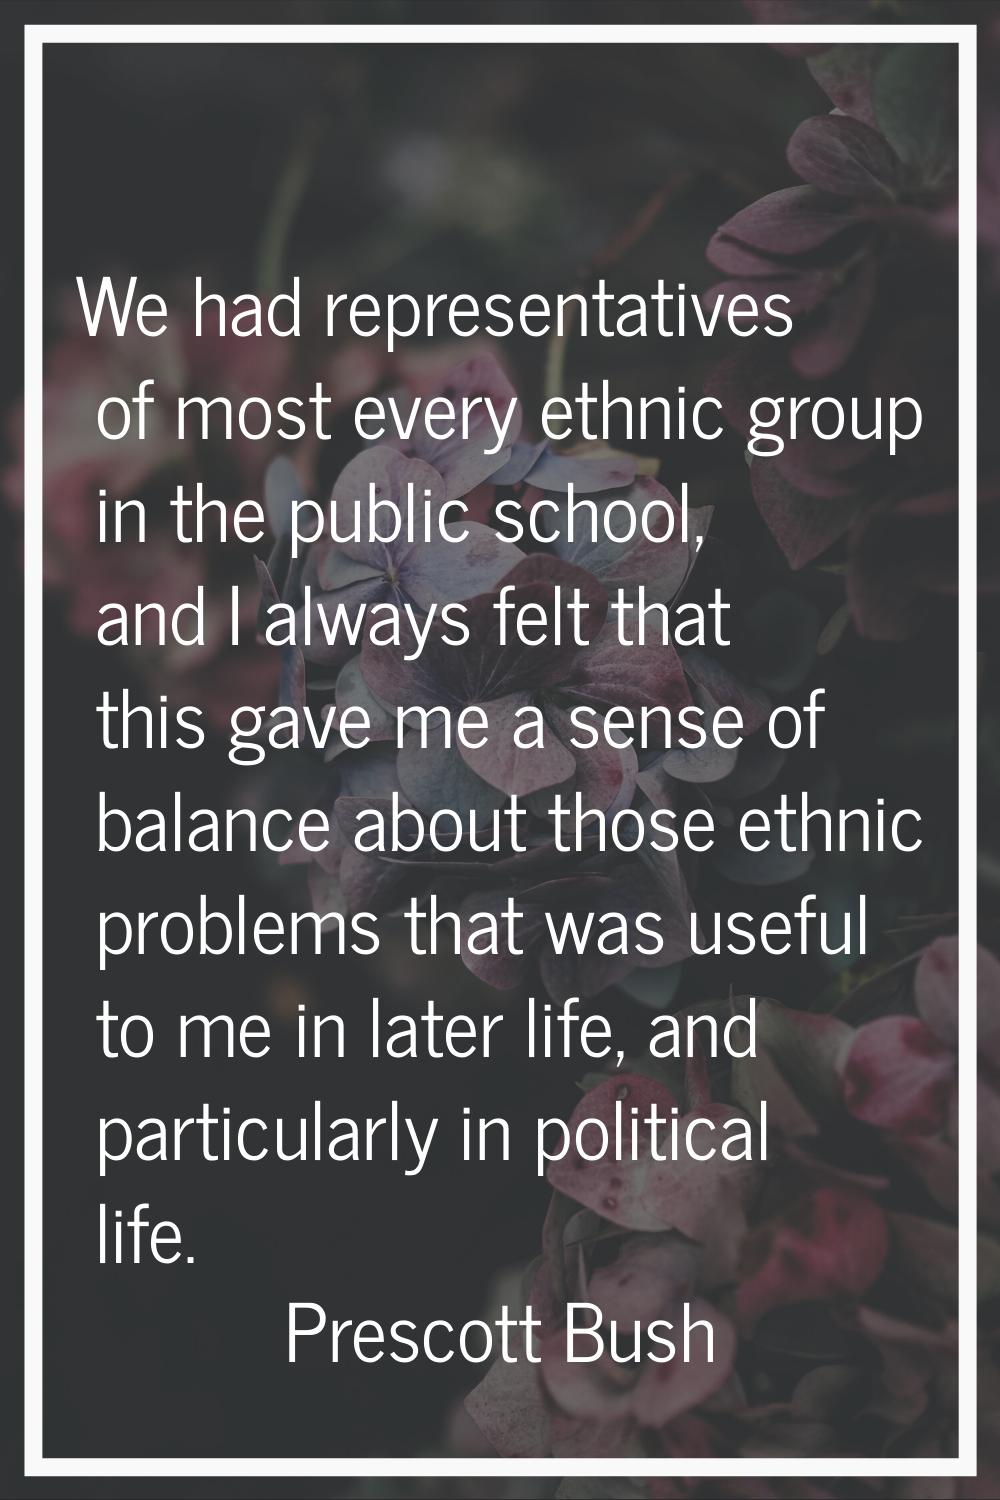 We had representatives of most every ethnic group in the public school, and I always felt that this